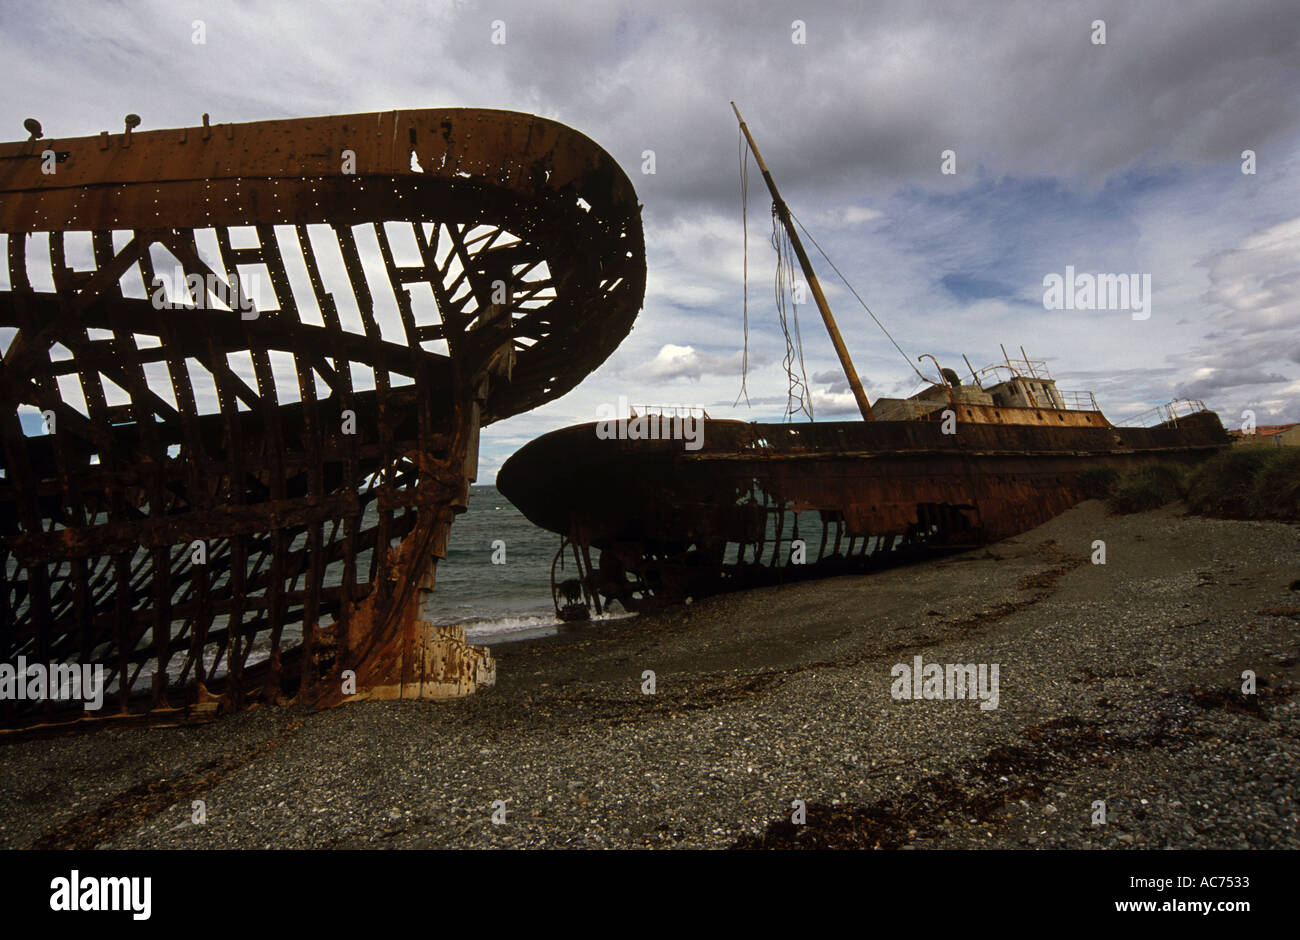 The rusting ship hulk of the AMBASSADOR on the beach at the GHOST RANCH ESTANCIA SAN GREGORIO PATAGONIA CHILE Stock Photo